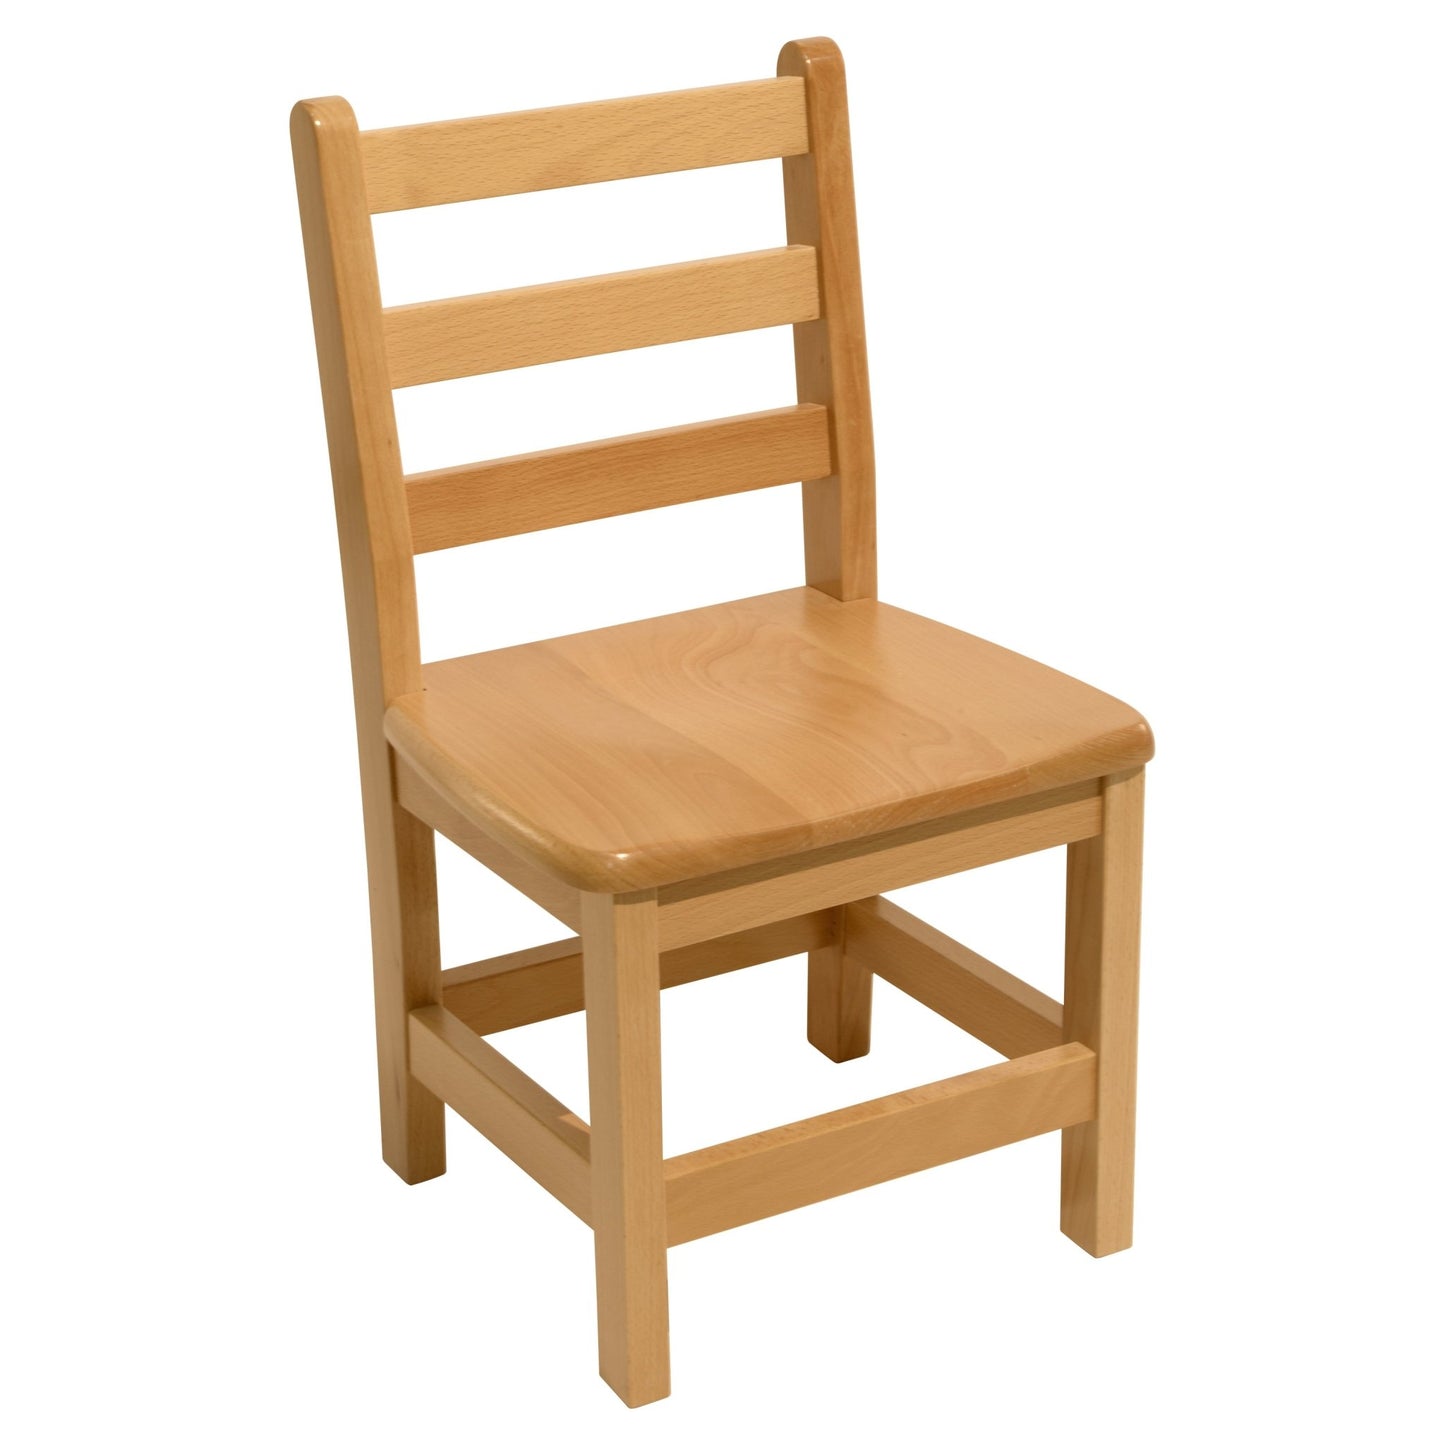 Wood Designs 16" Chair, Carton of (2) - (81602) - SchoolOutlet